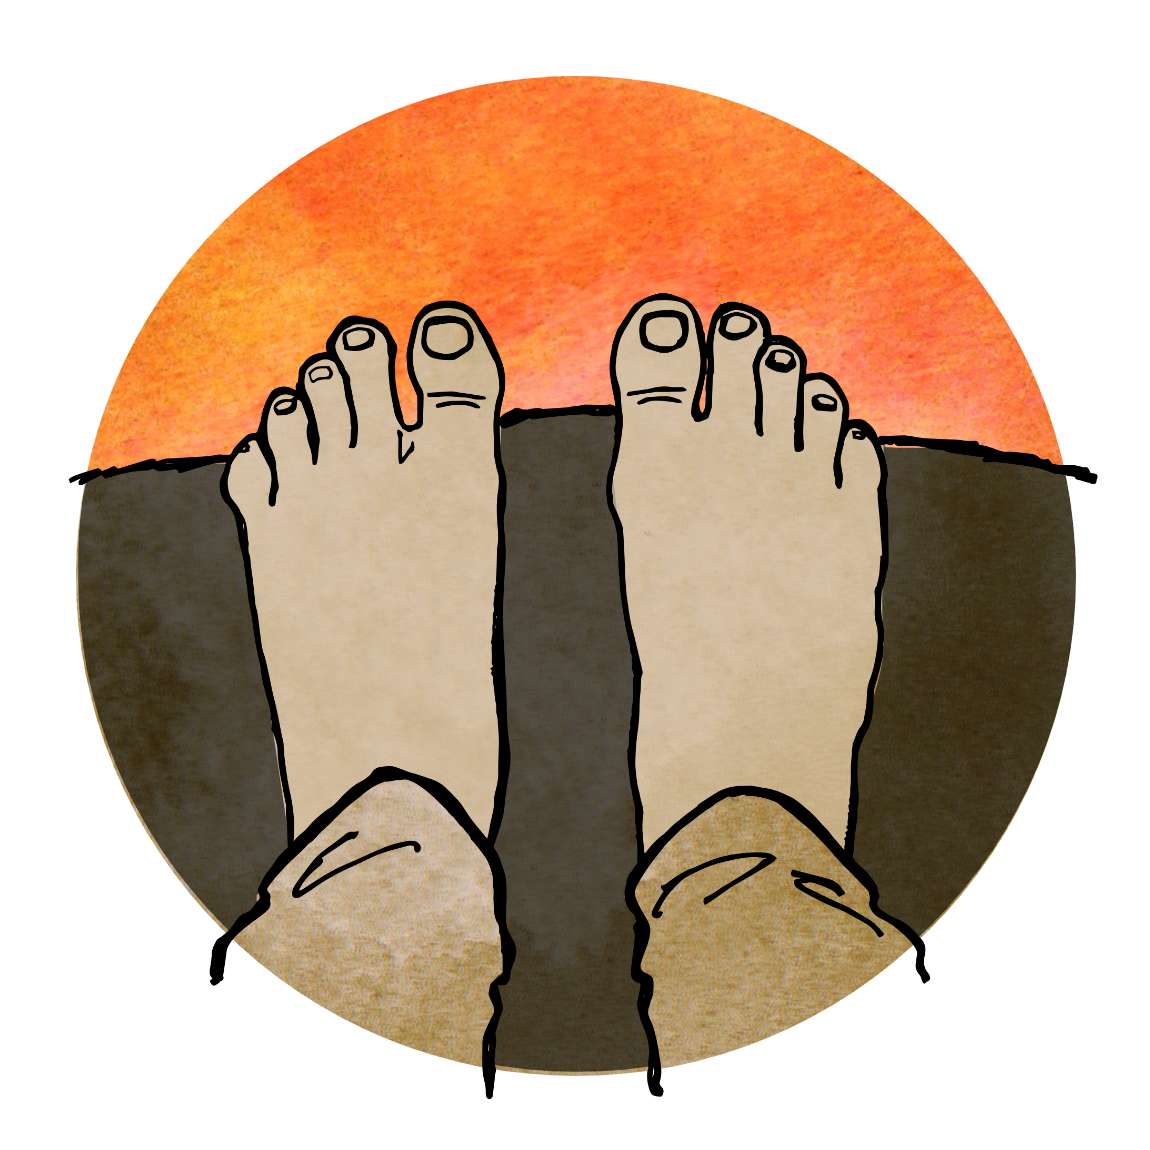 An illustration of two bare feet standing at a precipice, viewed as if looking down at oneʻs own feet against a background of deep orange.